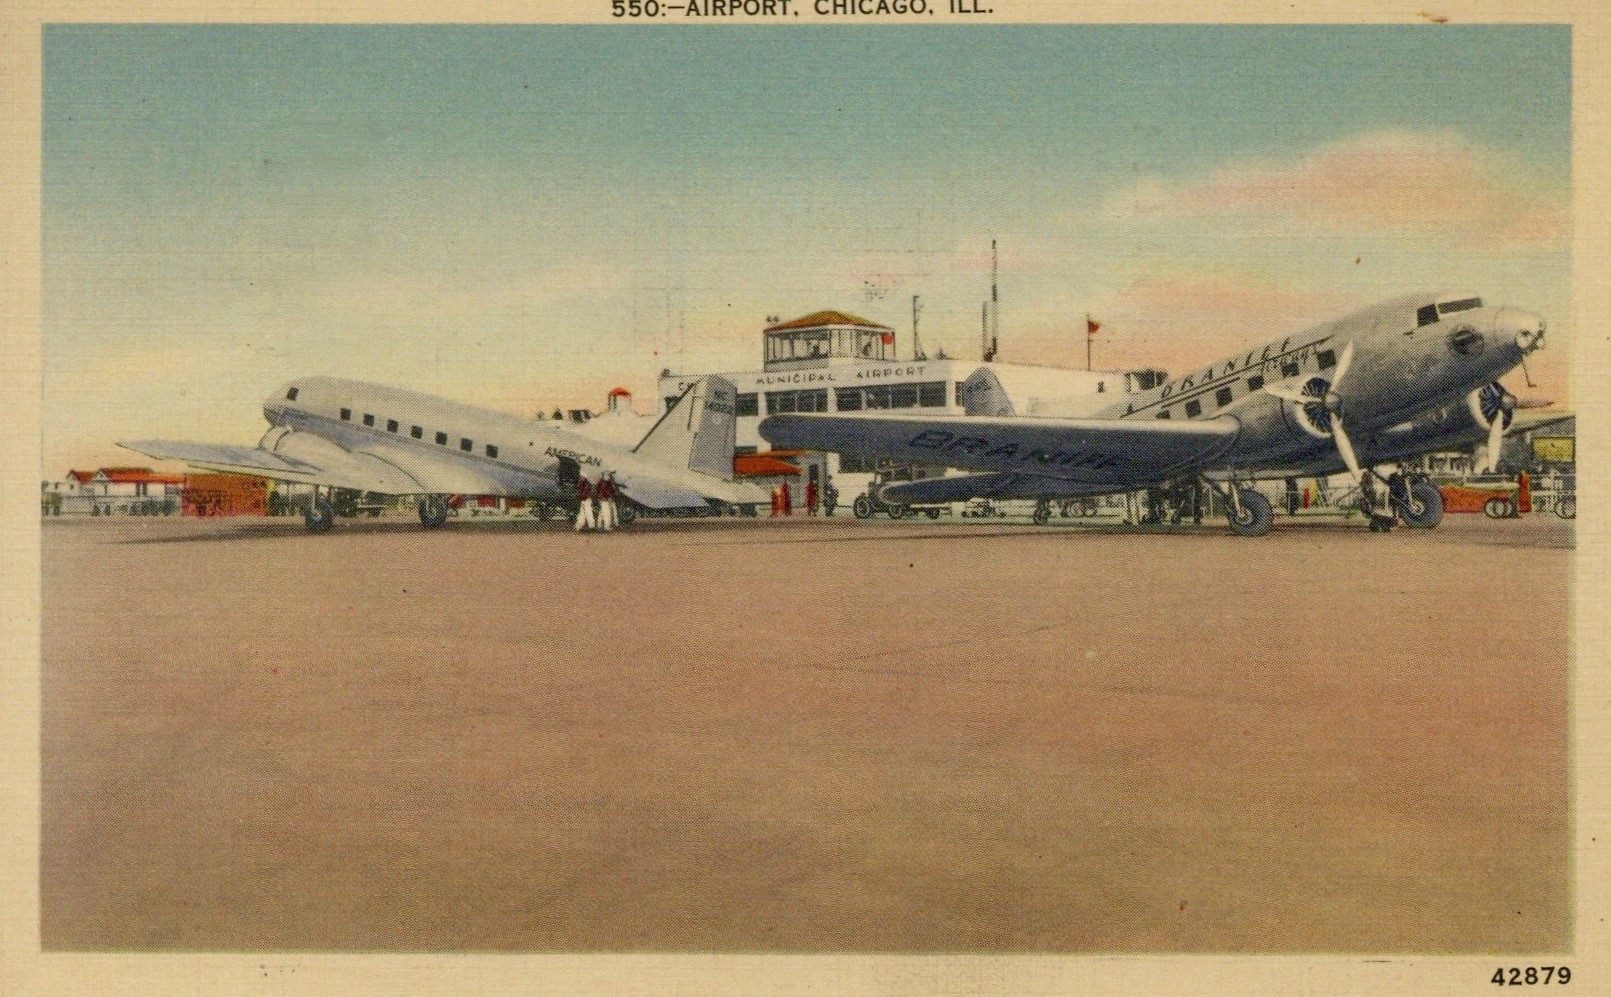 American Airlines Douglas DC-2, NC14922, and Braniff Airways DC-2 at Chicago Municipal Airport.  